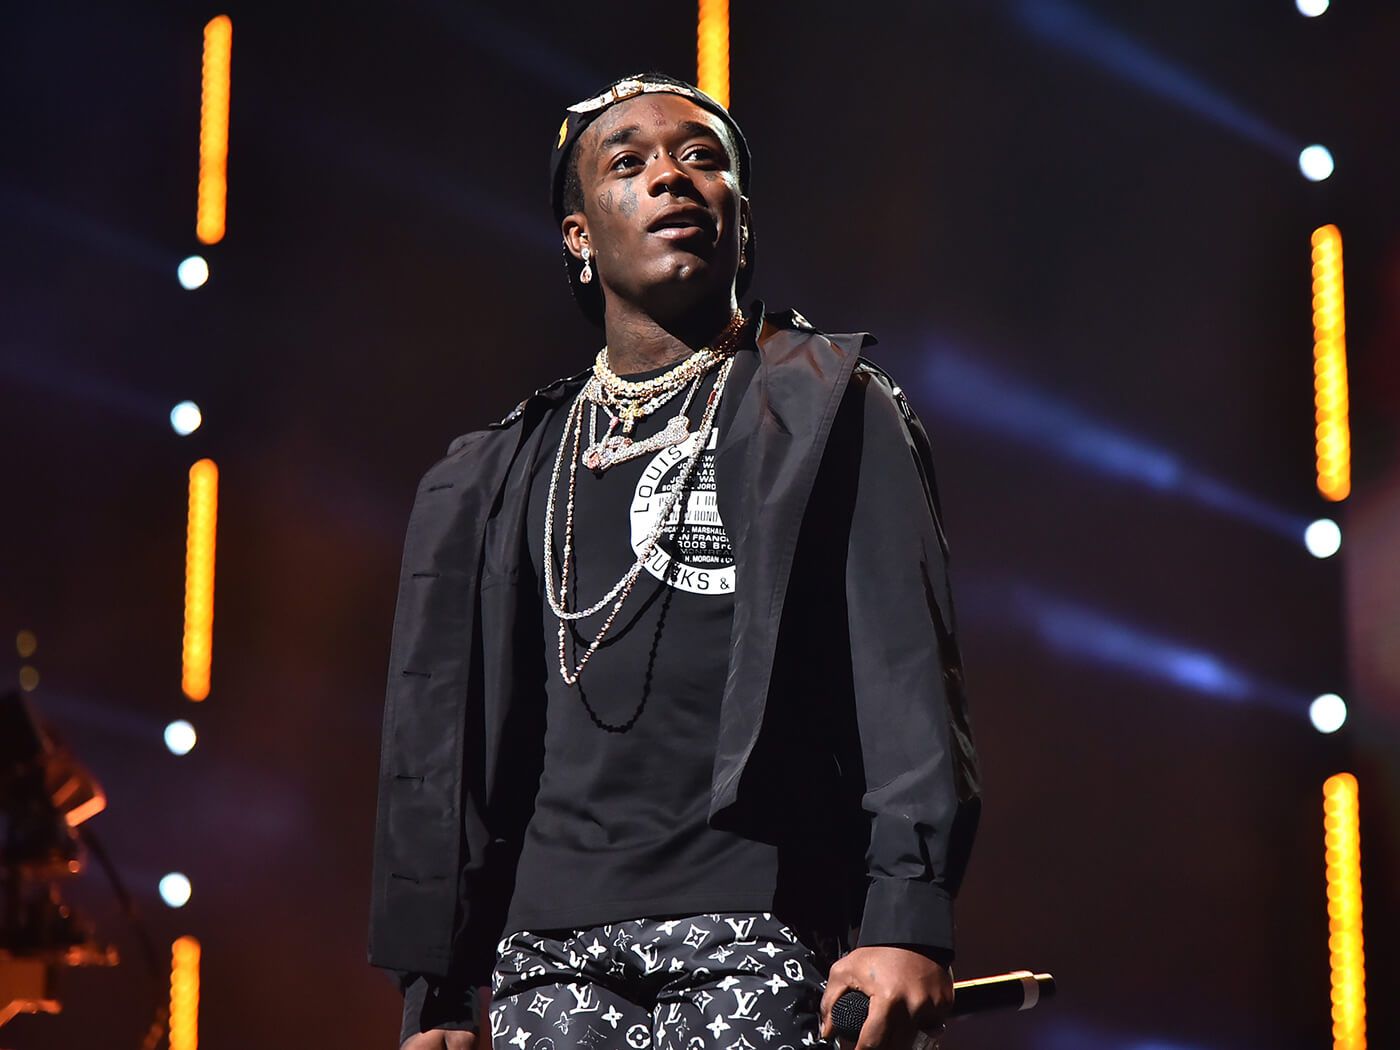 Lil Uzi Vert's producer says 'Eternal Atake' was delayed due to